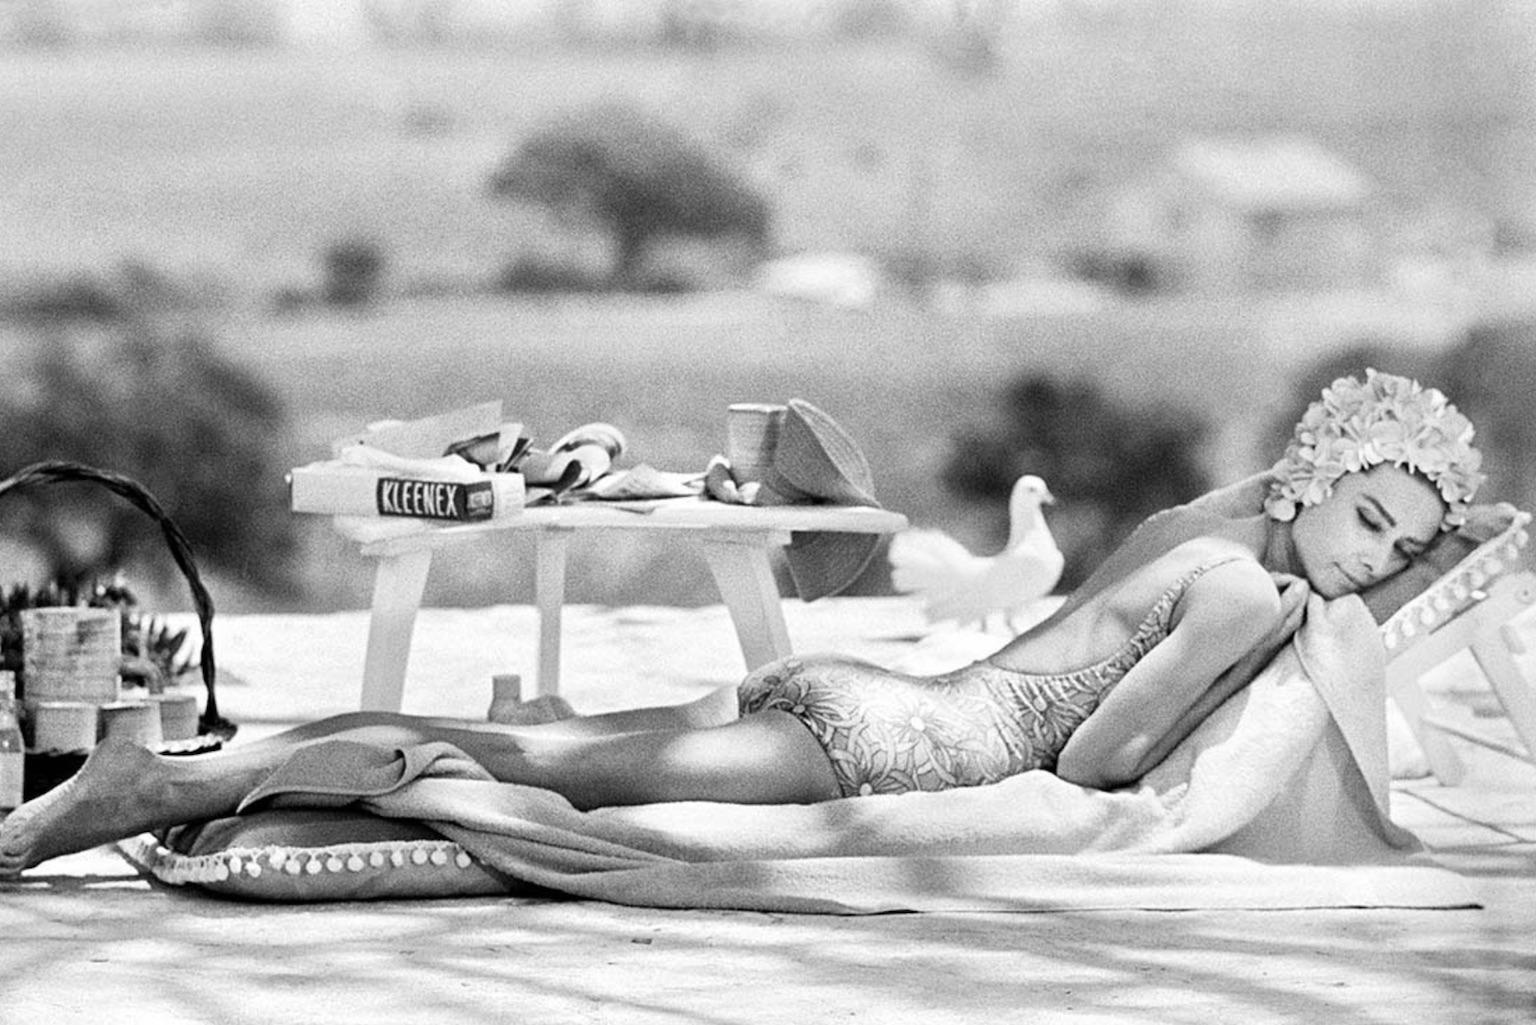 Terry O'Neill Black and White Photograph - Audrey Hepburn Relaxing by a Pool, 1966 